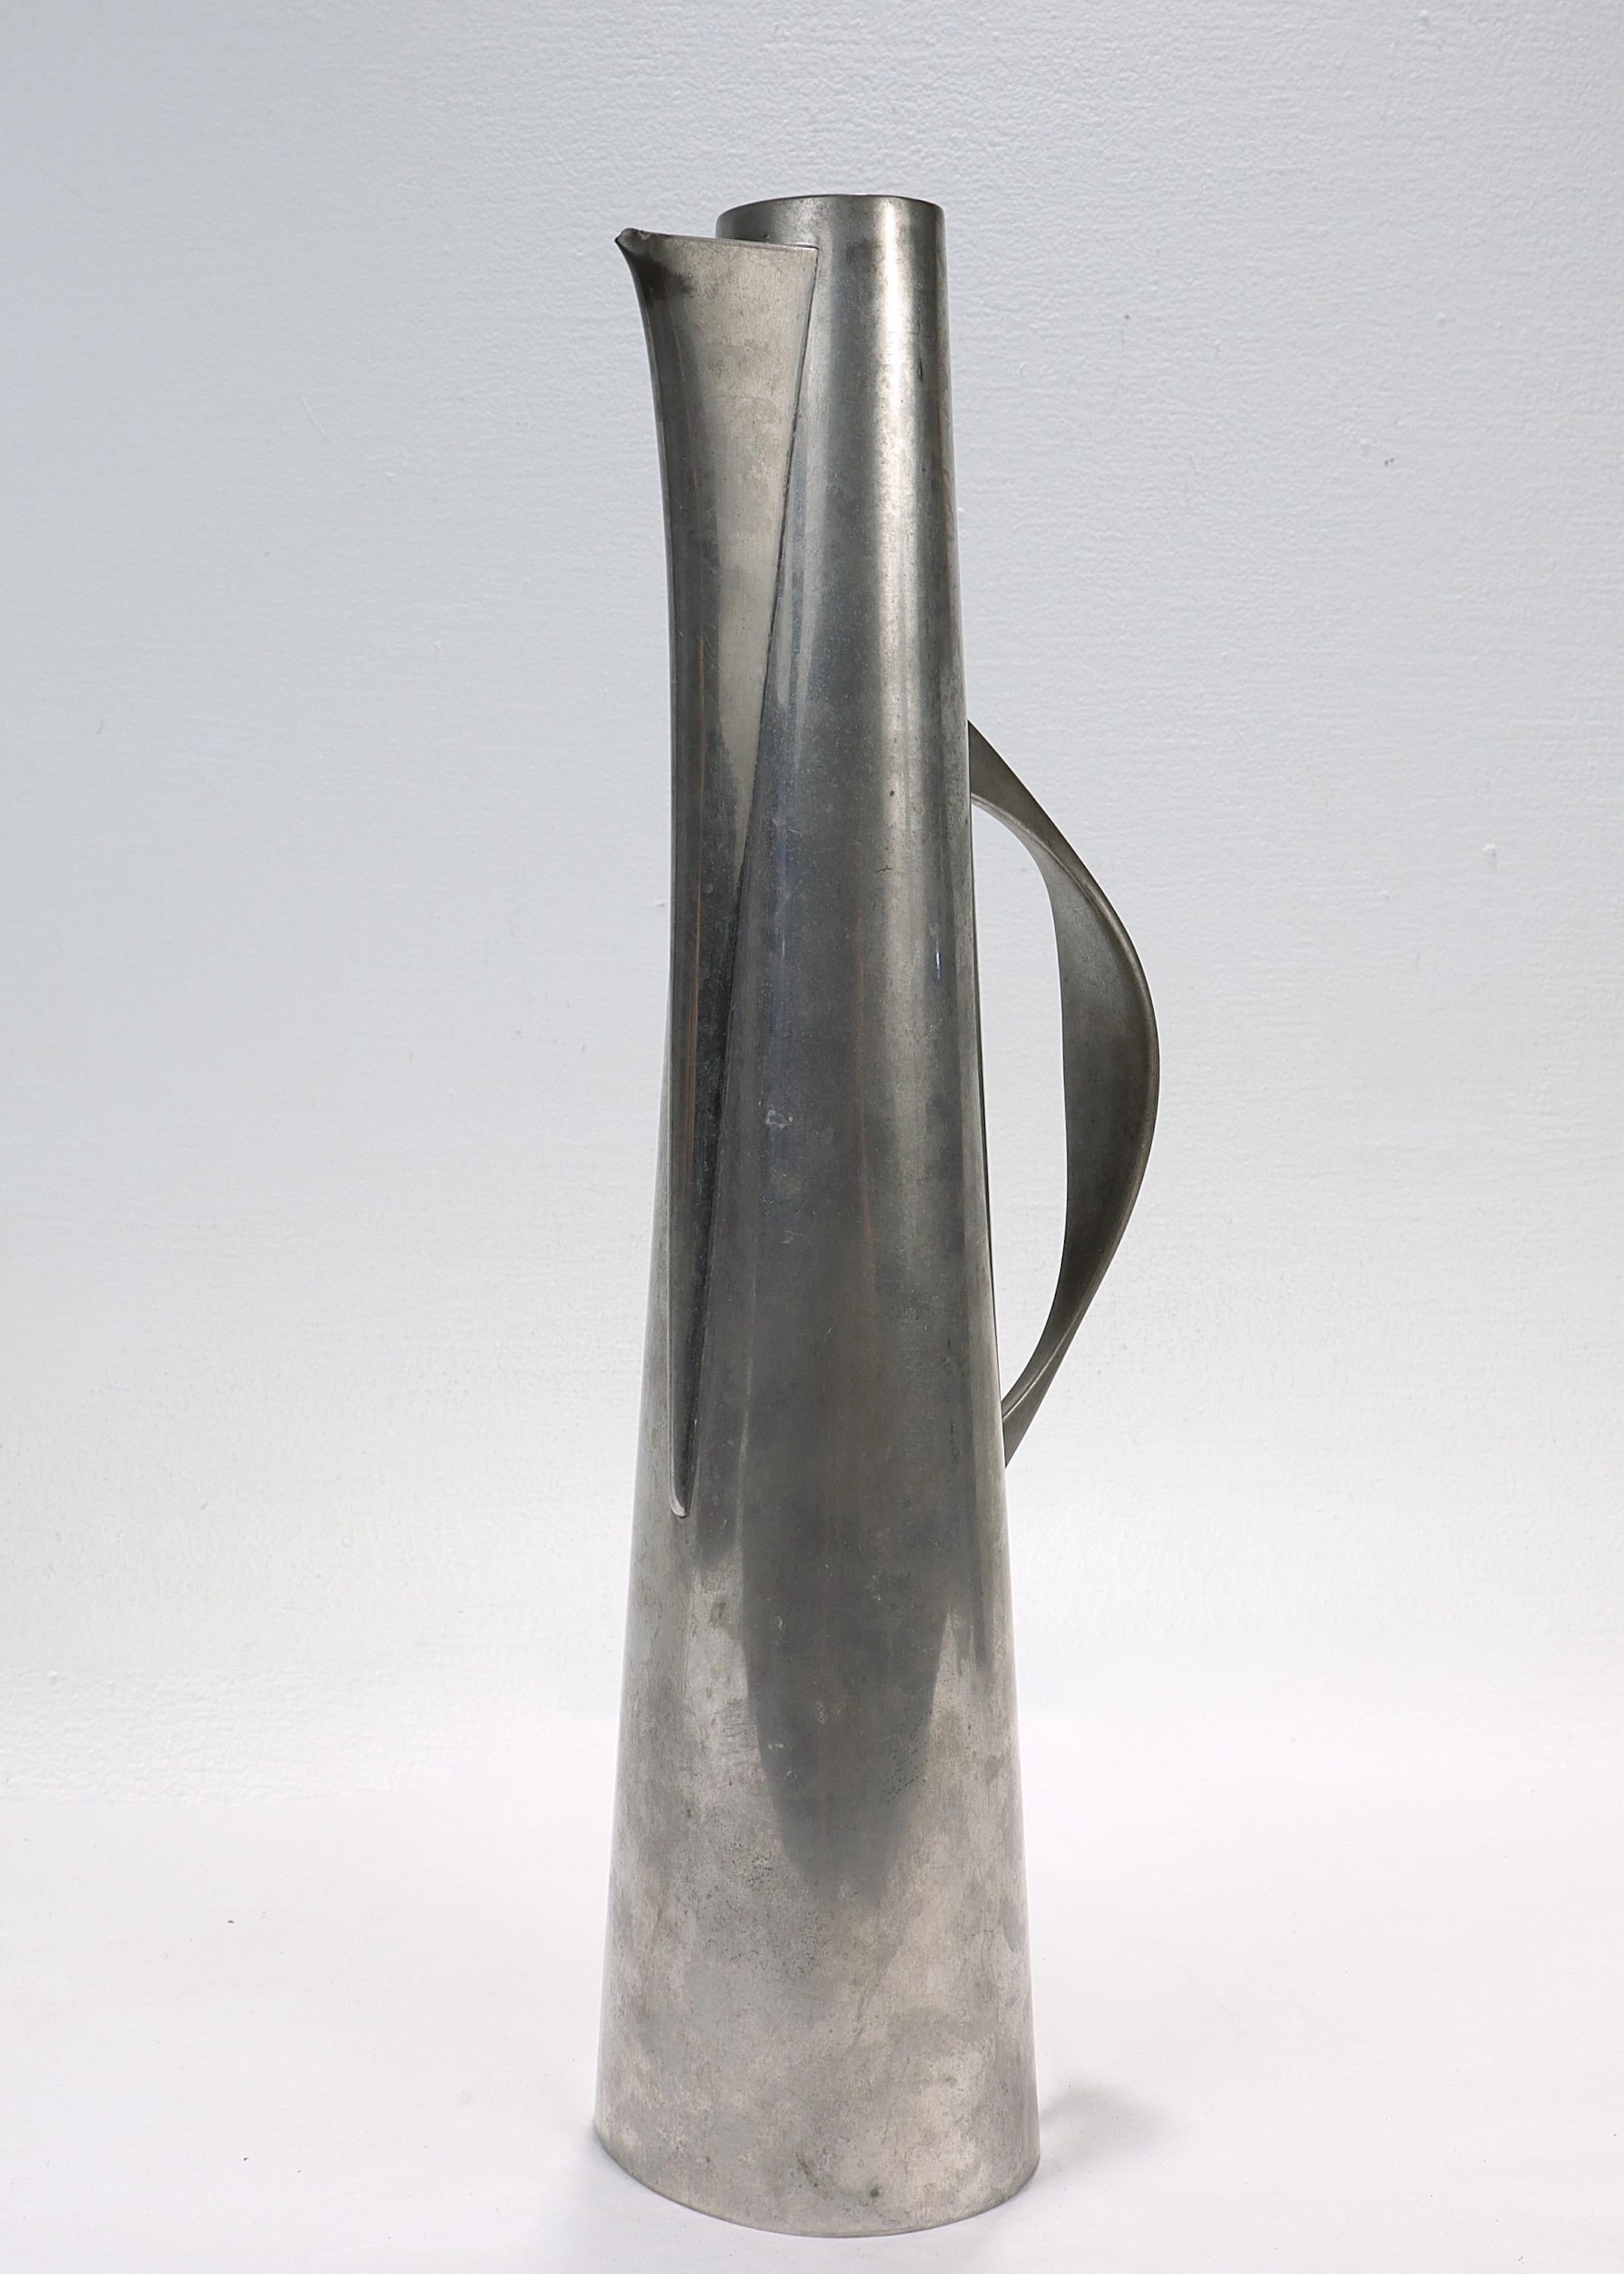 A fine Modernist pewter pitcher or ewer.

By John 'Jack' Prip.

In the form of a narrow, tapering pitcher with an integral handle.

Prip, a master metalsmith, is an extremely important figure in the history of American metalsmithing. Prip was